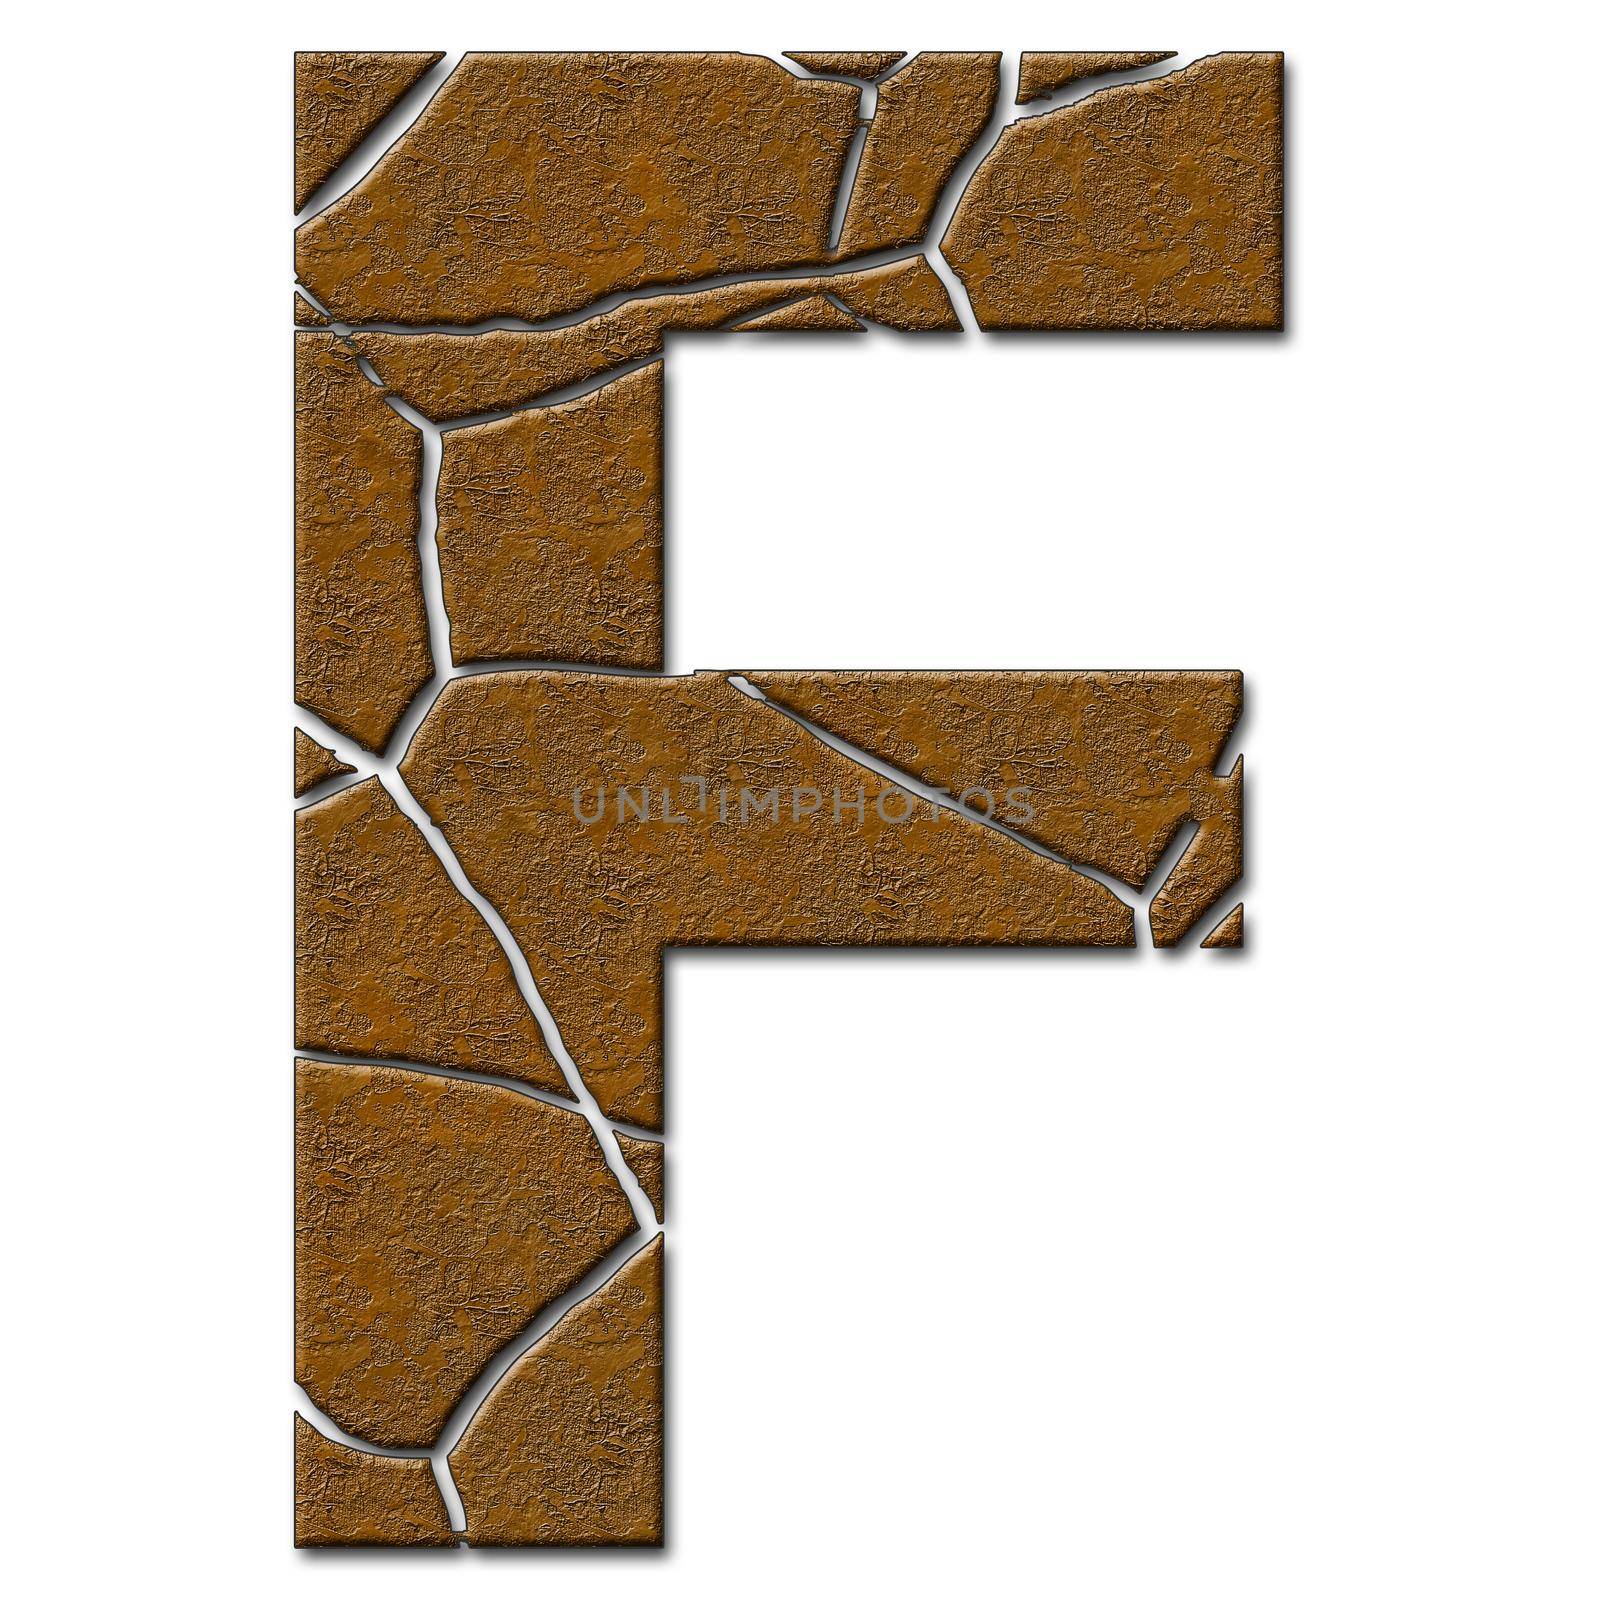 3D render of metal pattern and texture alphabet capital letter with cracks